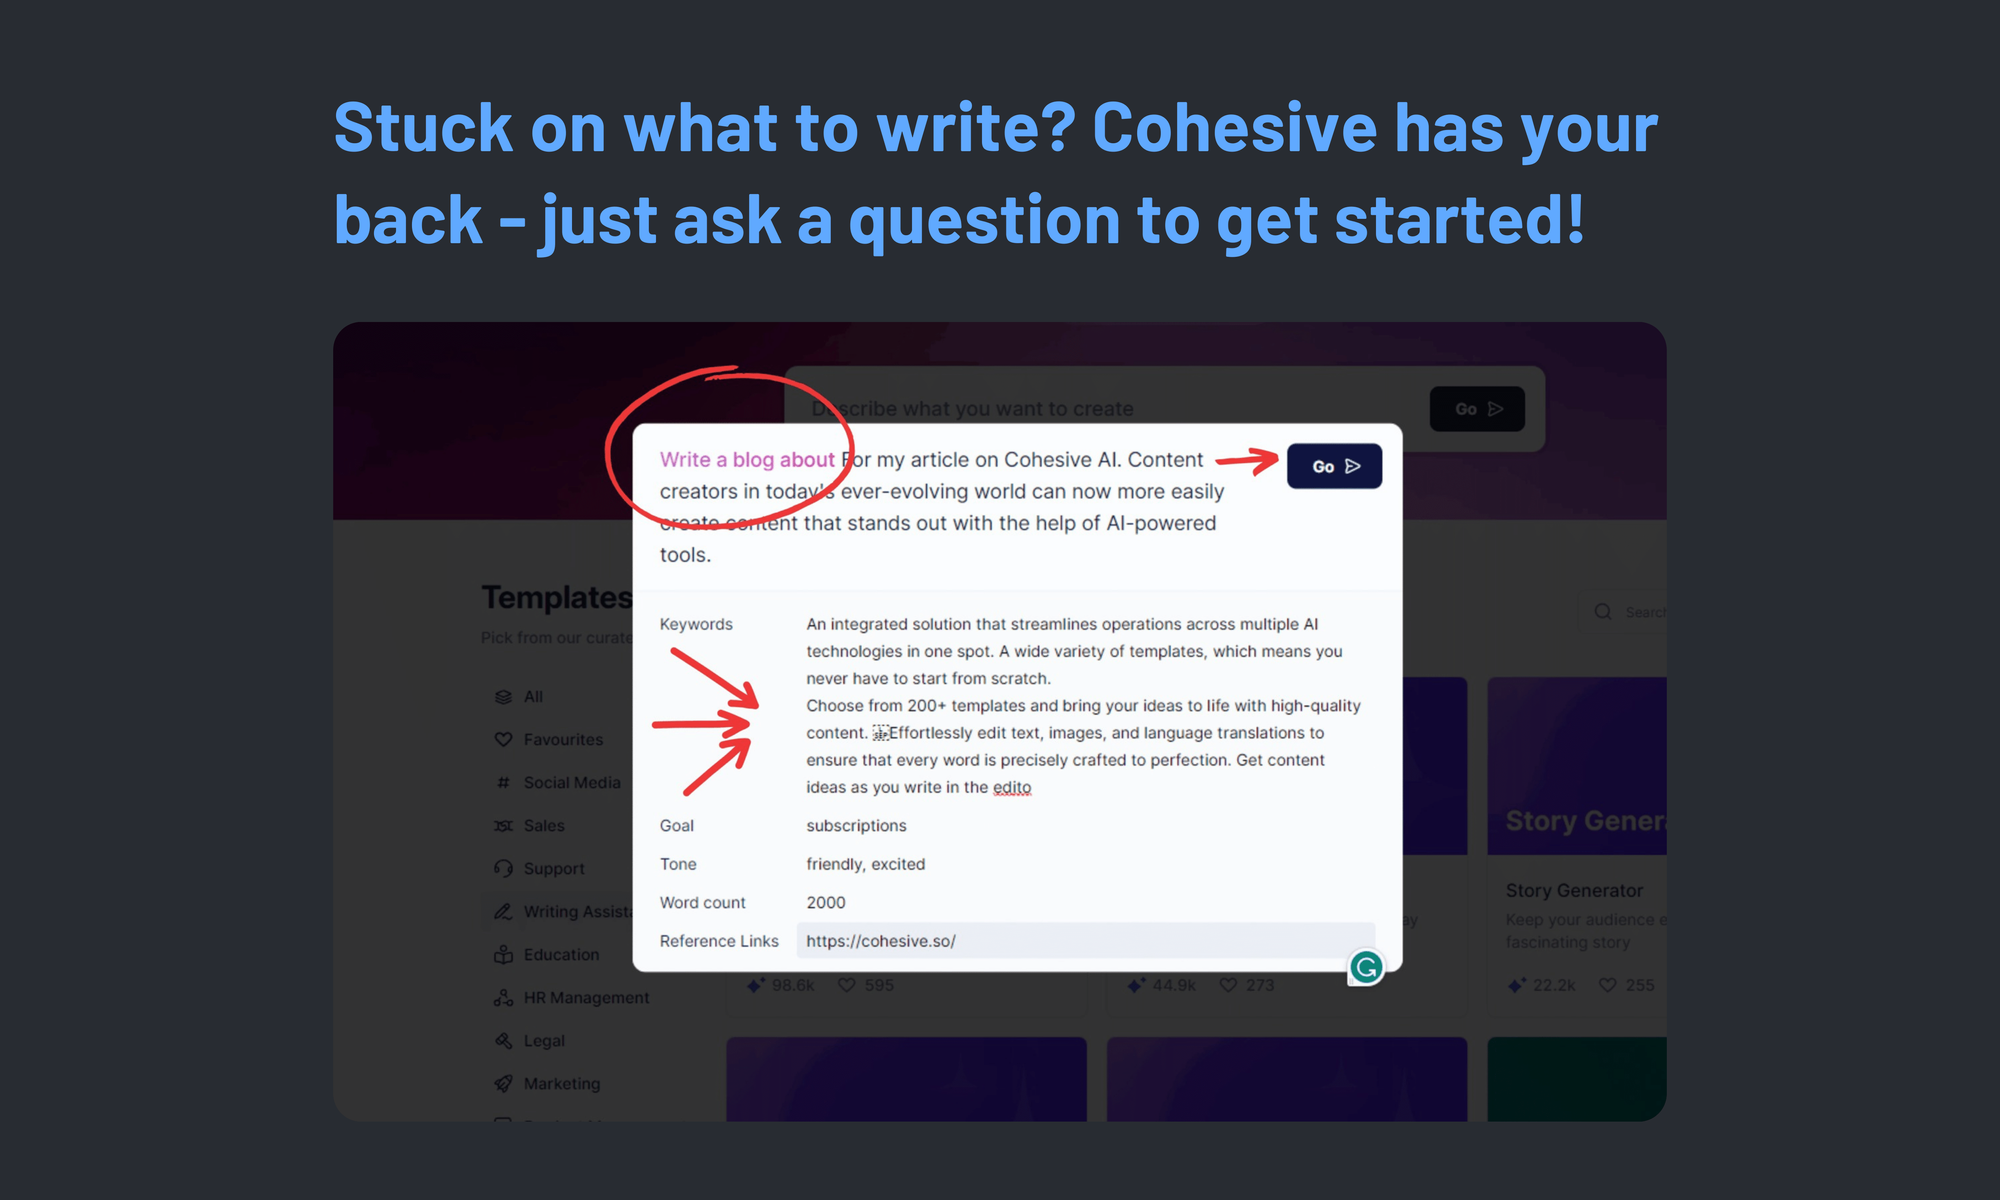 Cohesive AI, where a posed question triggers instant, relevant content generation.